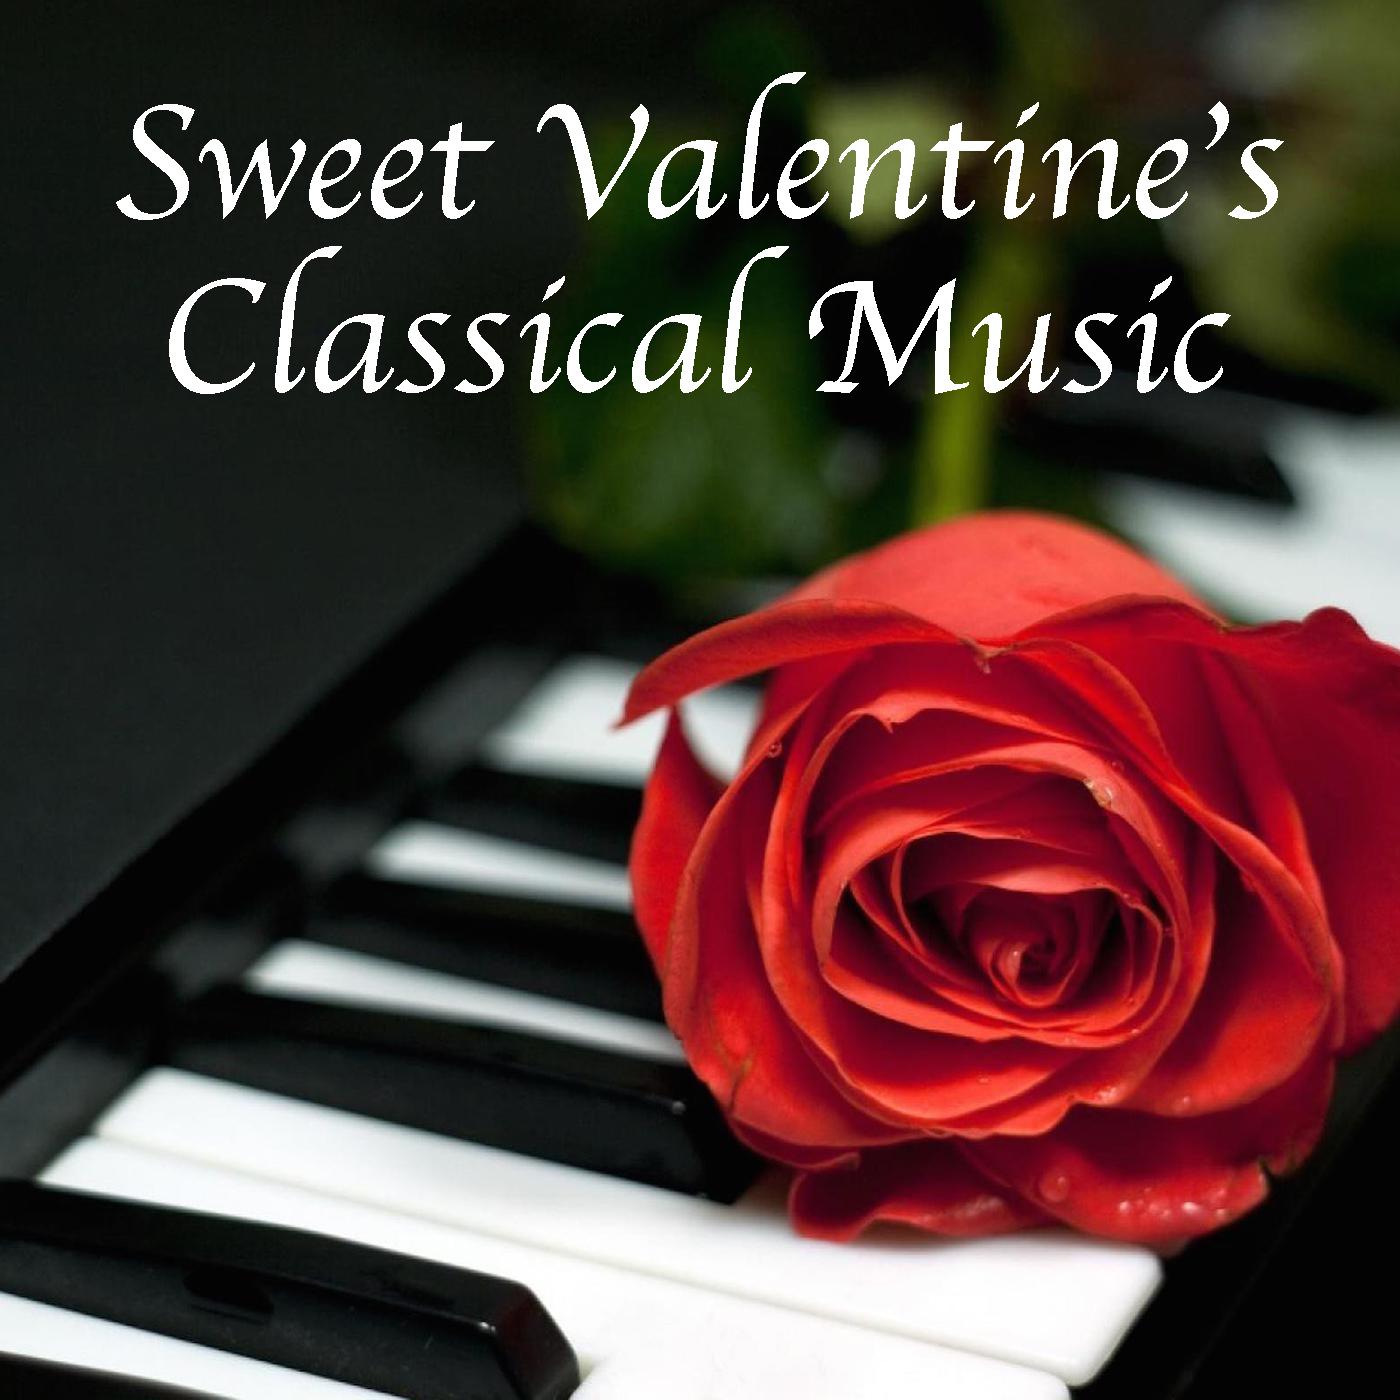 Sweet Valentine's Classical Music